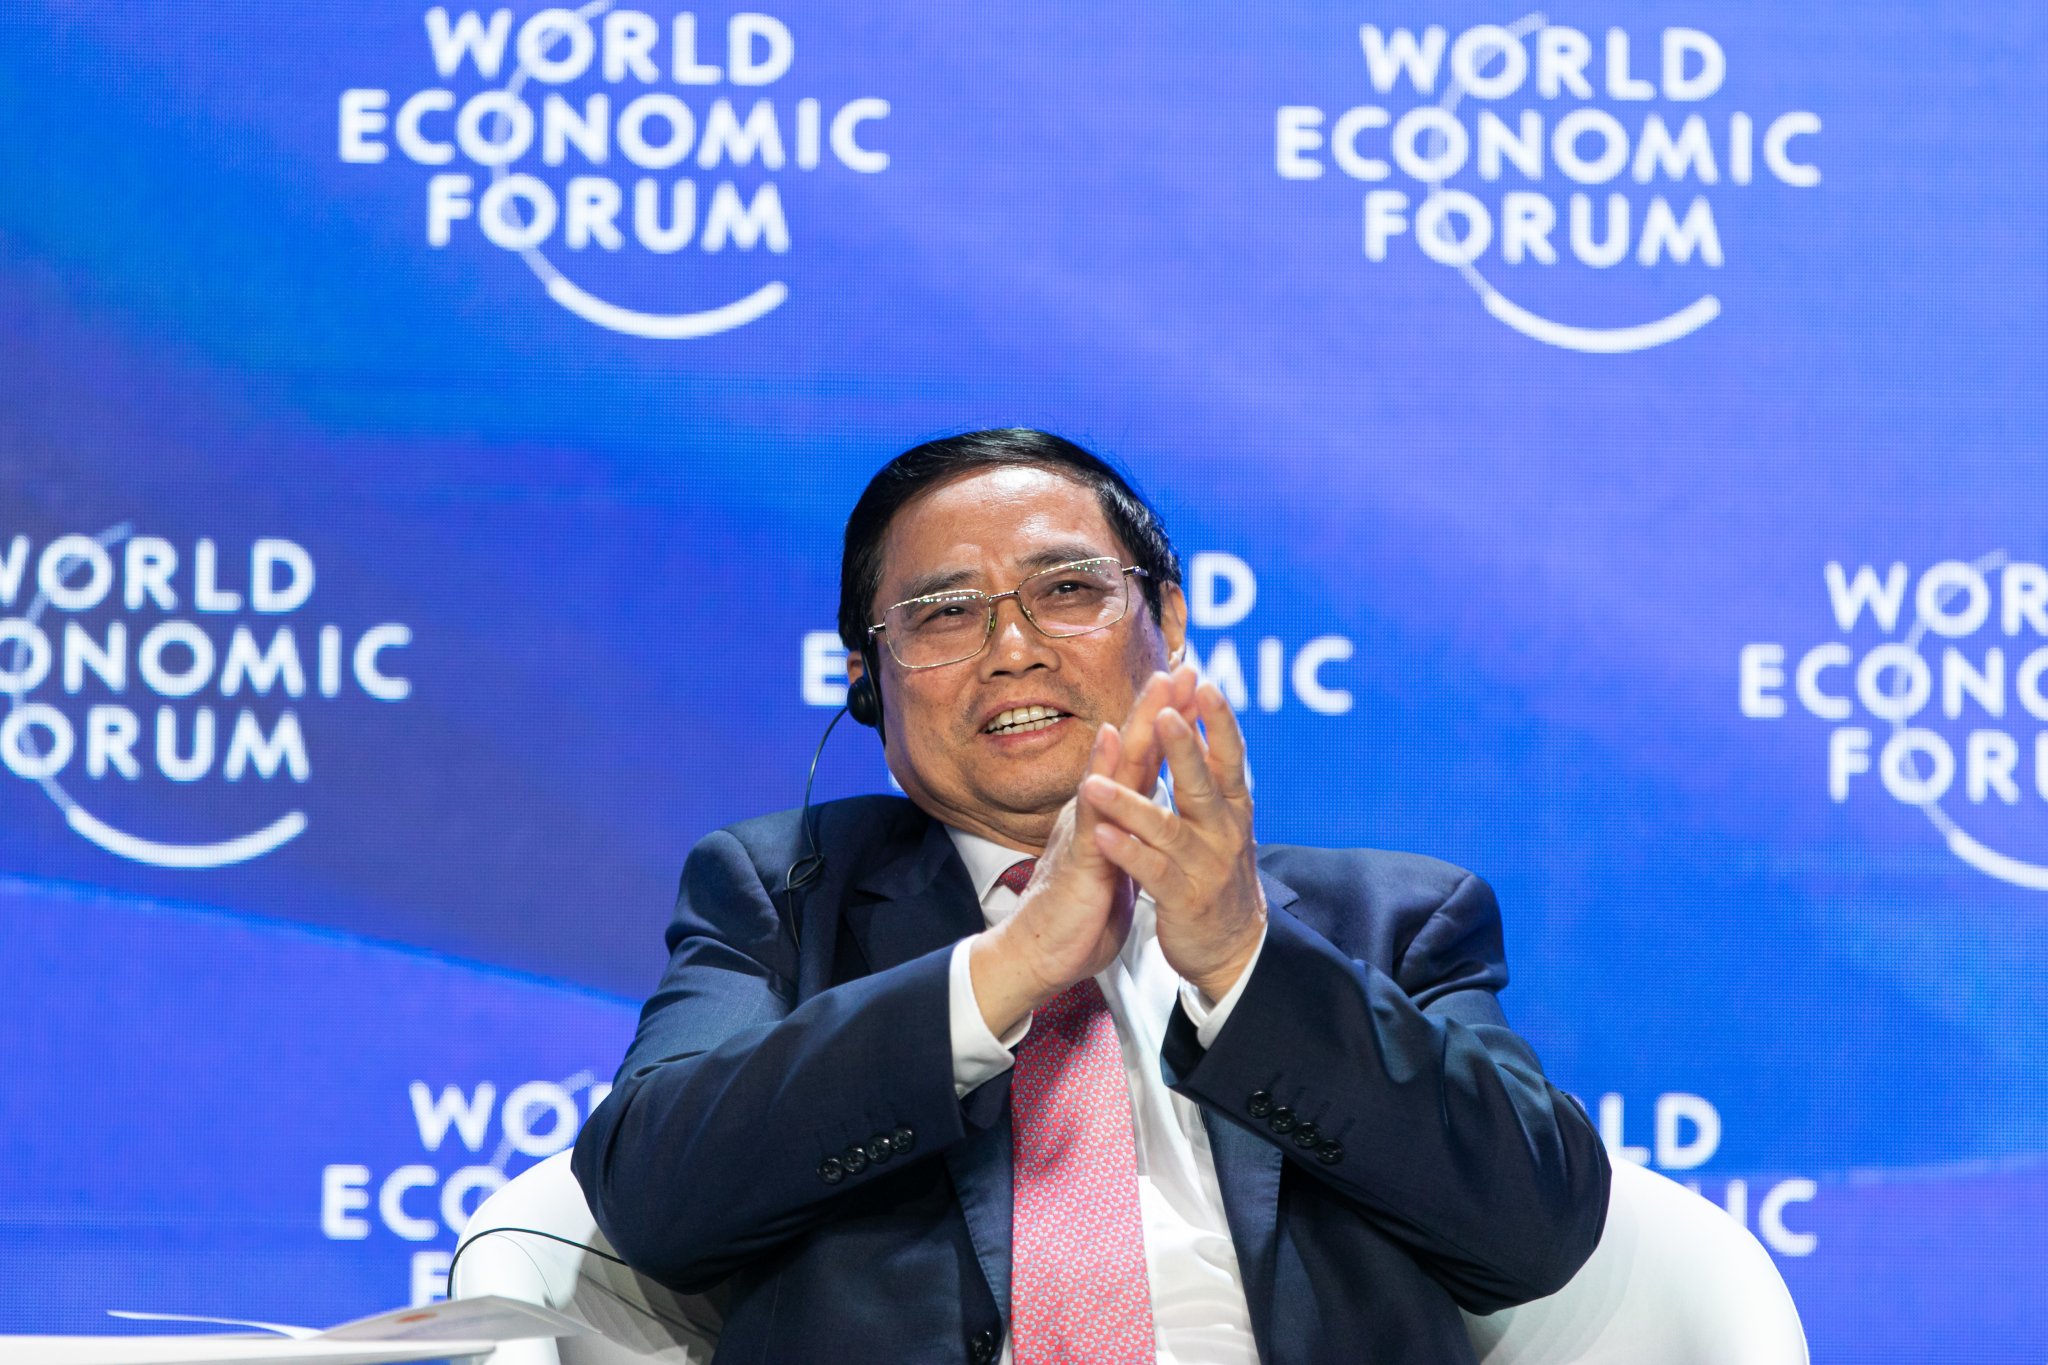 Viet Nam Prime Minister at AMNC23: Here are the 6 most significant economic headwinds